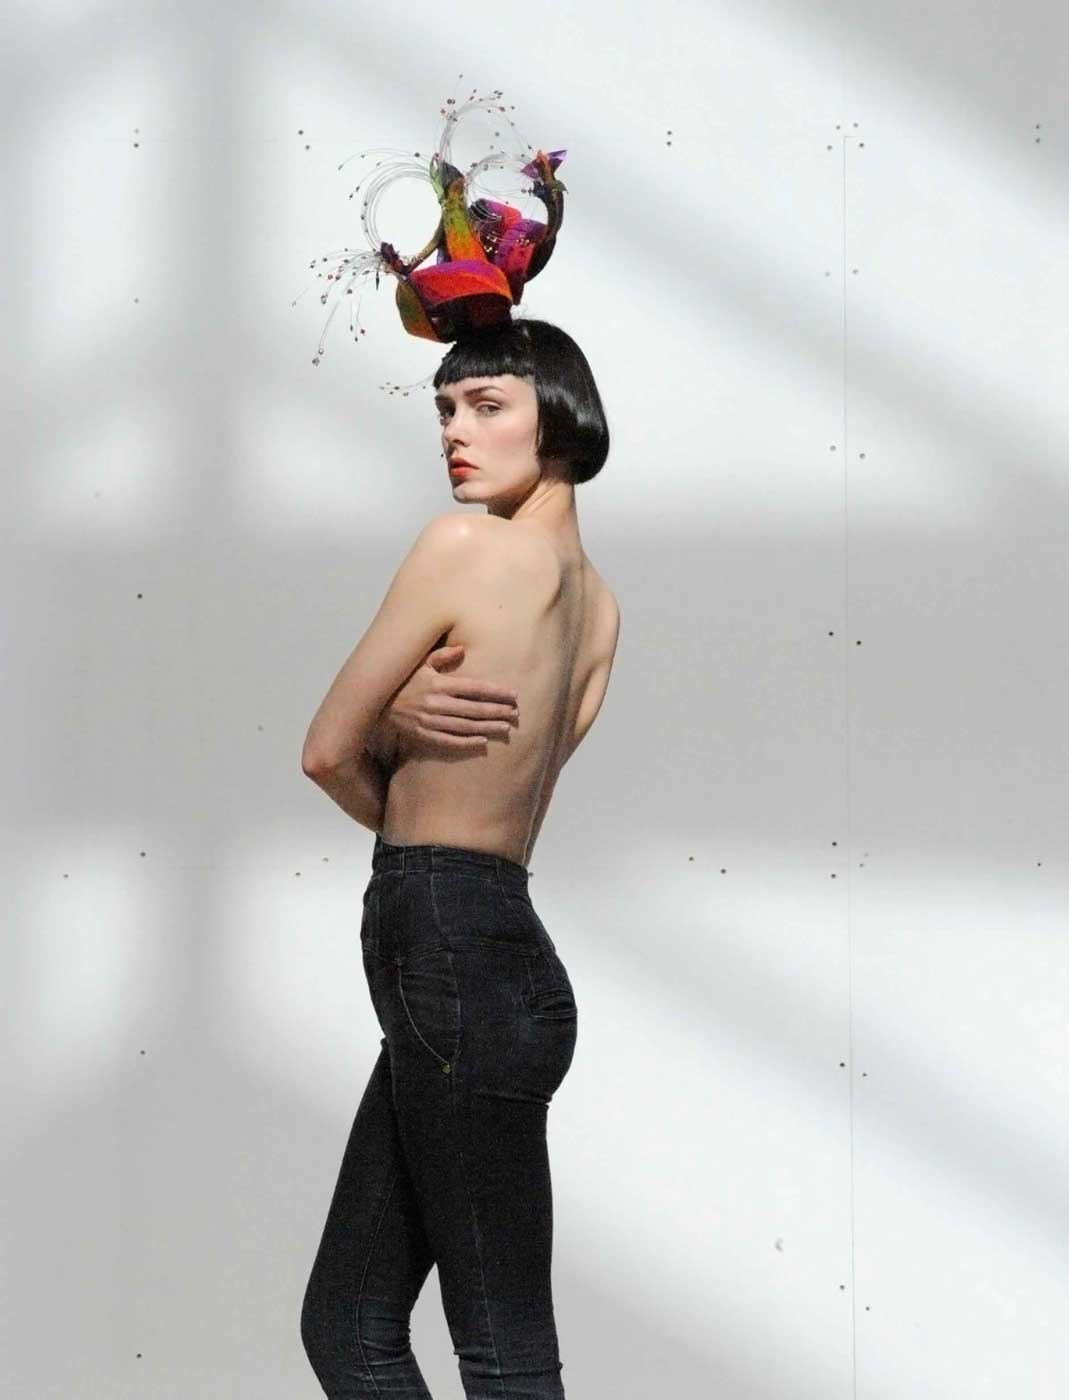 Fashion Photography: female topless with red fascinator